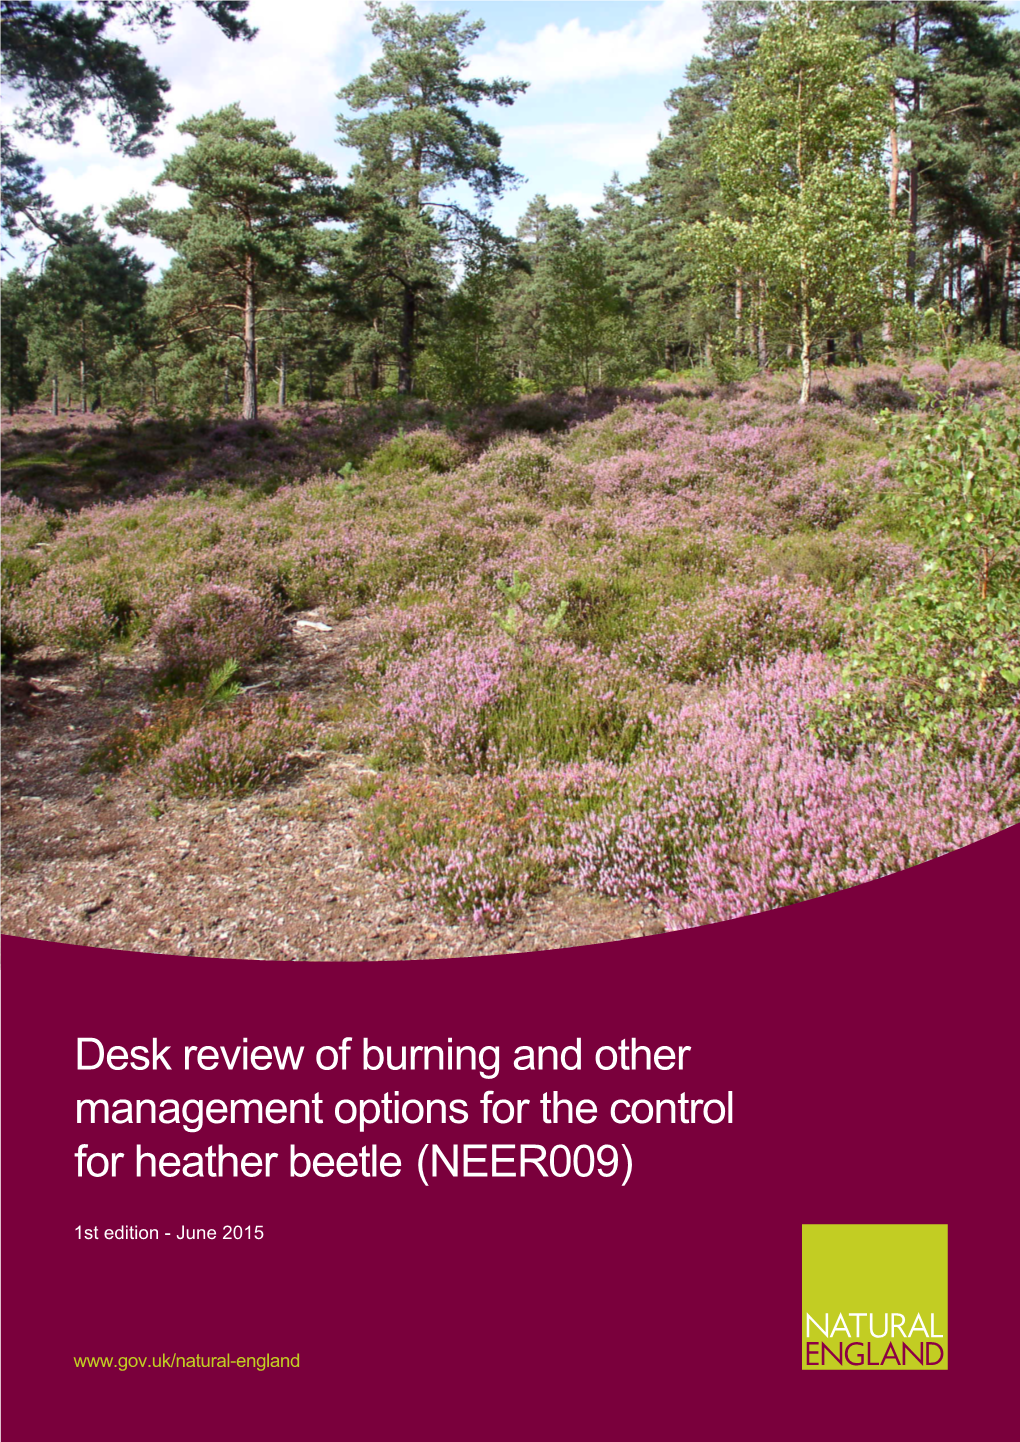 Desk Review of Burning and Other Management Options for the Control for Heather Beetle (NEER009)